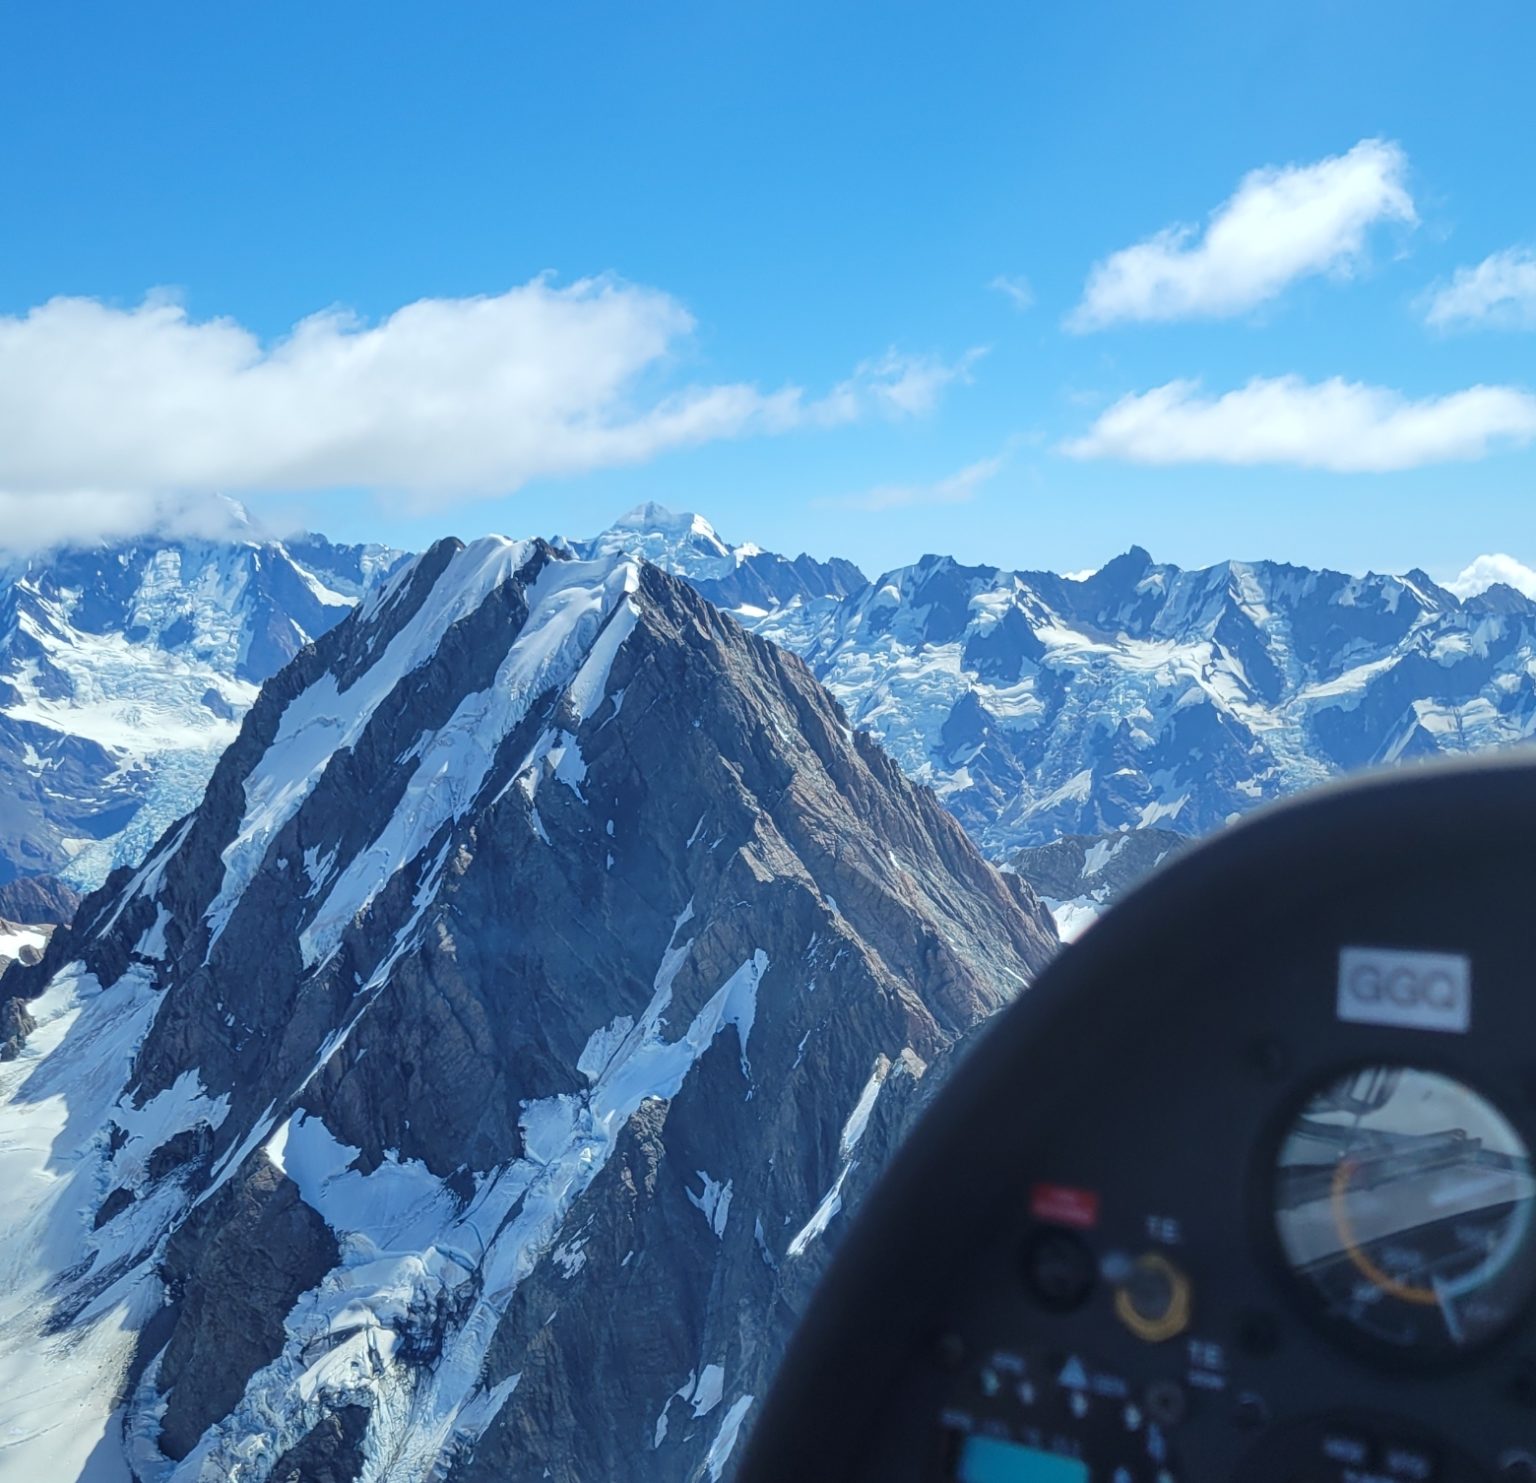 Cockpit view over mountains